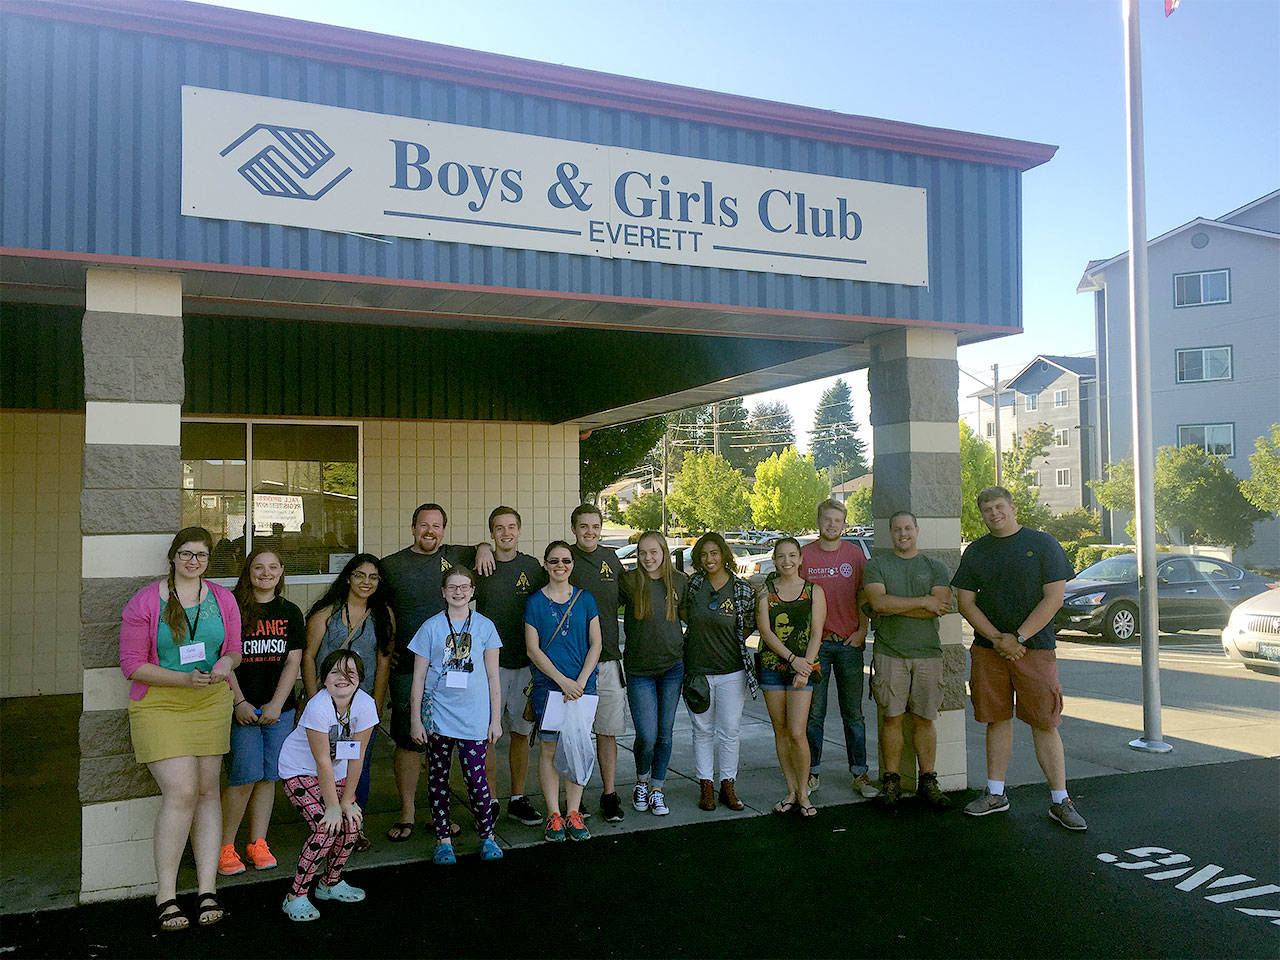 The new Snohomish County Rotaract Club on Aug. 31 held a “Back to School Field Day” at the Everett Boys & Girls Club. (Contributed photo)